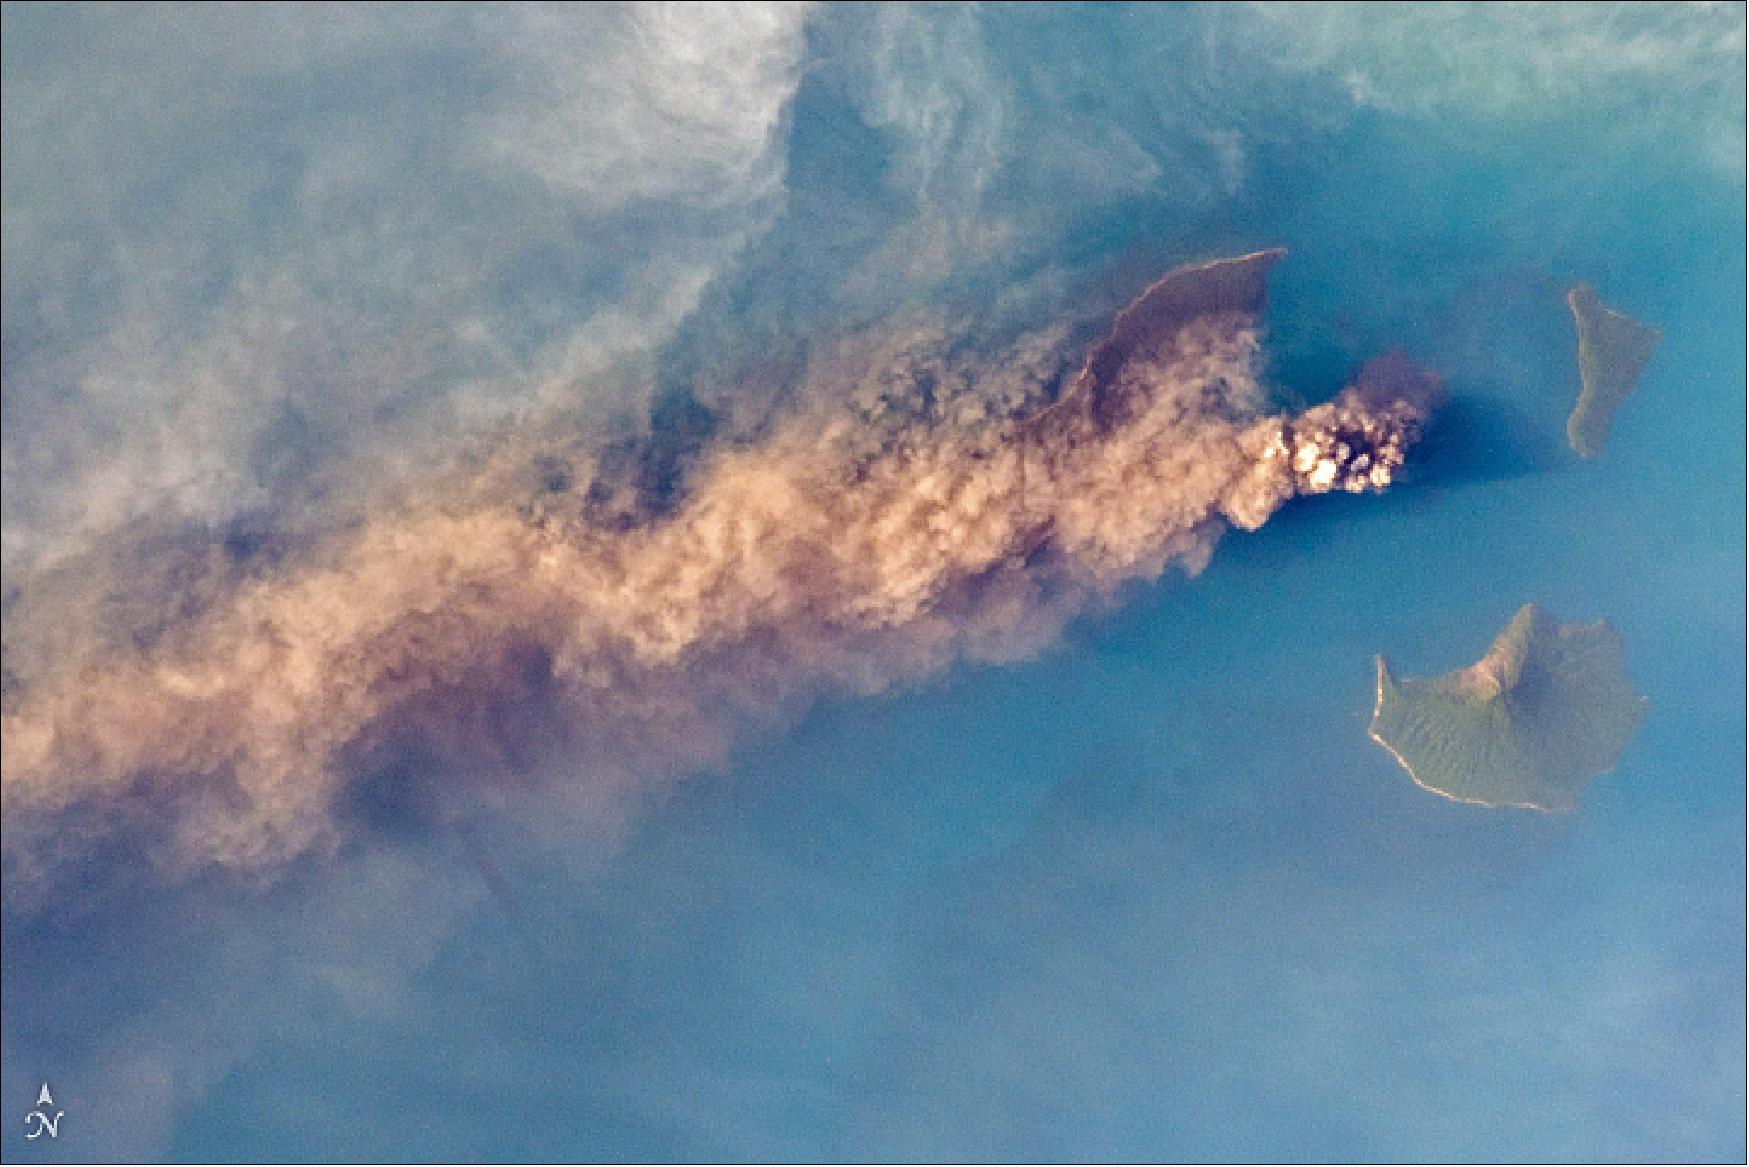 Figure 58: The plume was also visible from the International Space Station. European Space Agency astronaut Alexander Gerst snapped this photograph of the plume on September 24, 2018 (image credit: ISS photograph by Alex Gerst, European Space Agency/NASA, story by Kathryn Hansen)